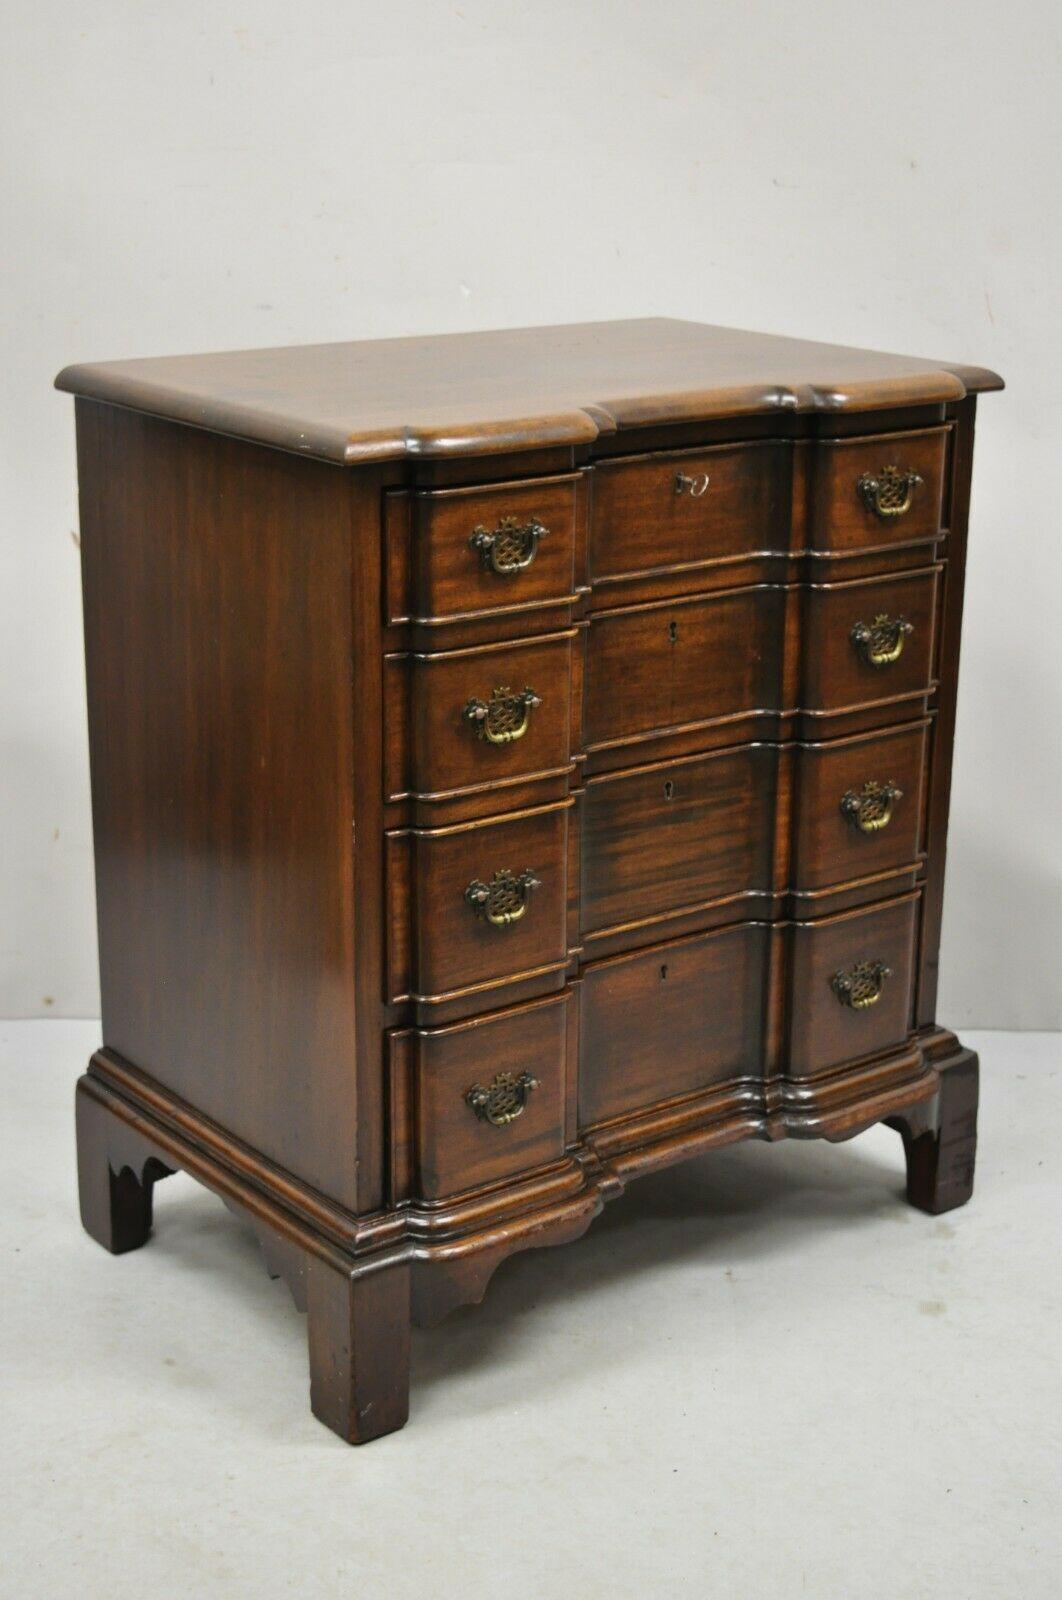 Vintage Charak English Chippendale style mahogany 4 drawer blockfront chest. Item features a carved blockfront, solid wood construction, beautiful wood grain, distressed finish, nicely carved details, original label, 4 dovetailed drawers, very nice